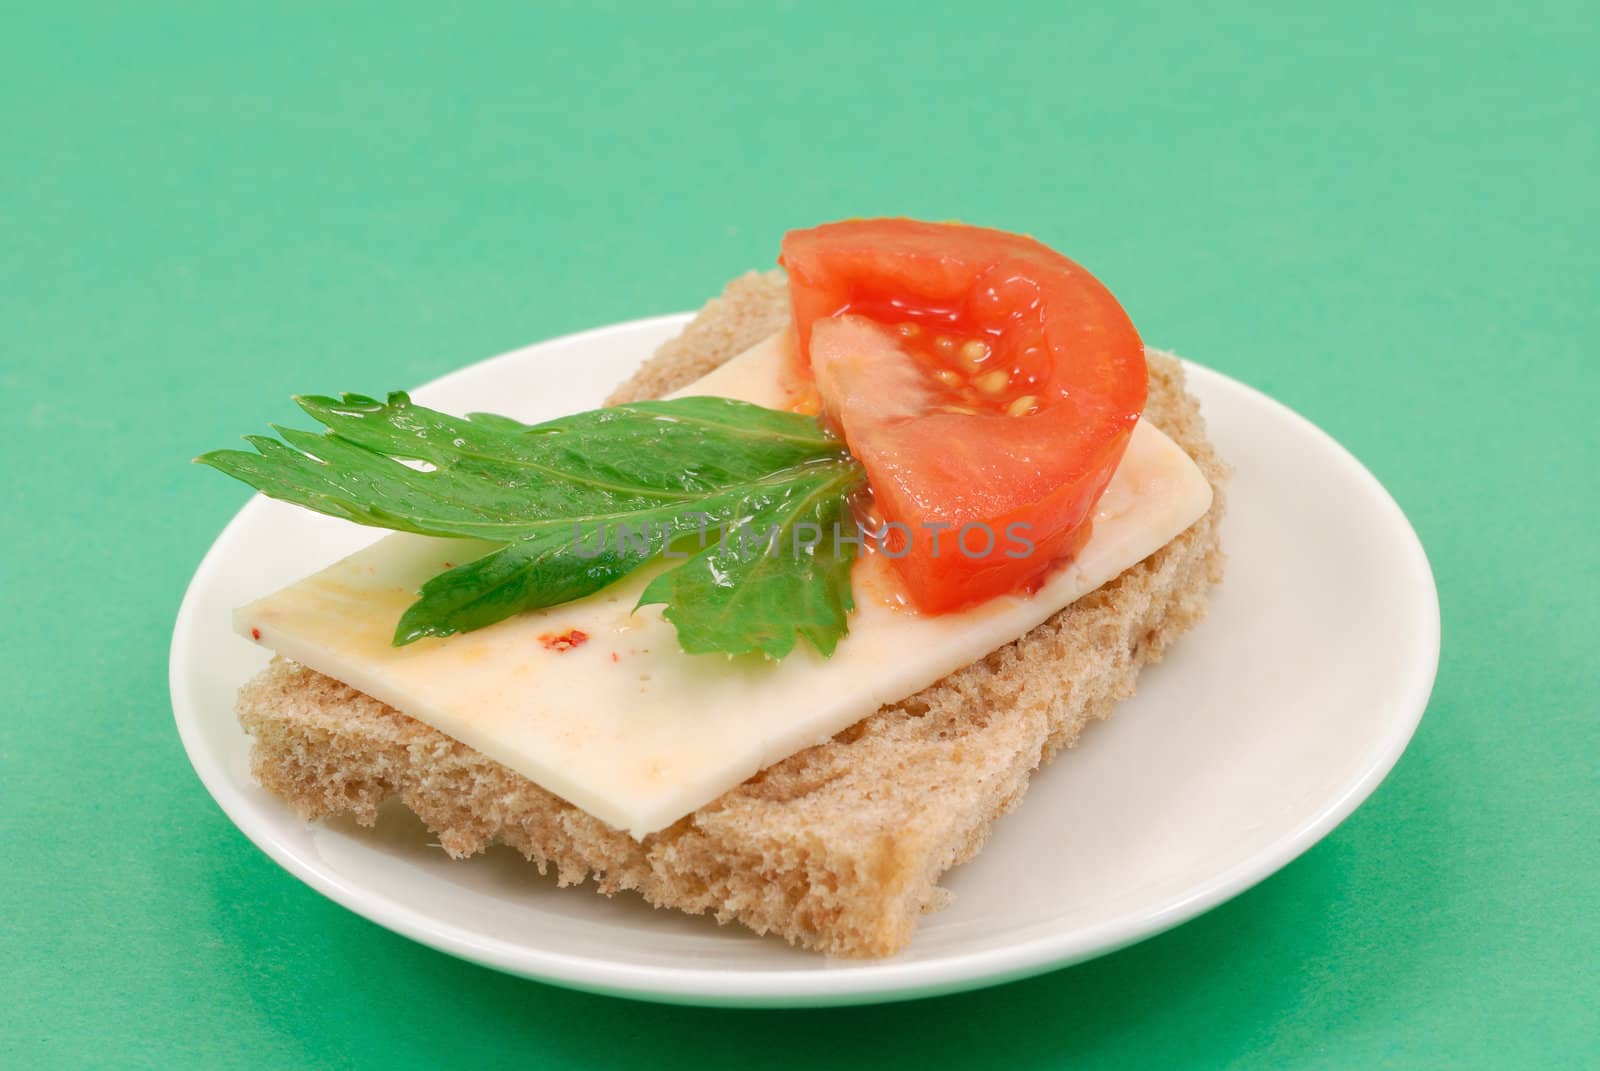 
Buterbrob with Mexican cheese, slice tomatoes and green leaves of parsley